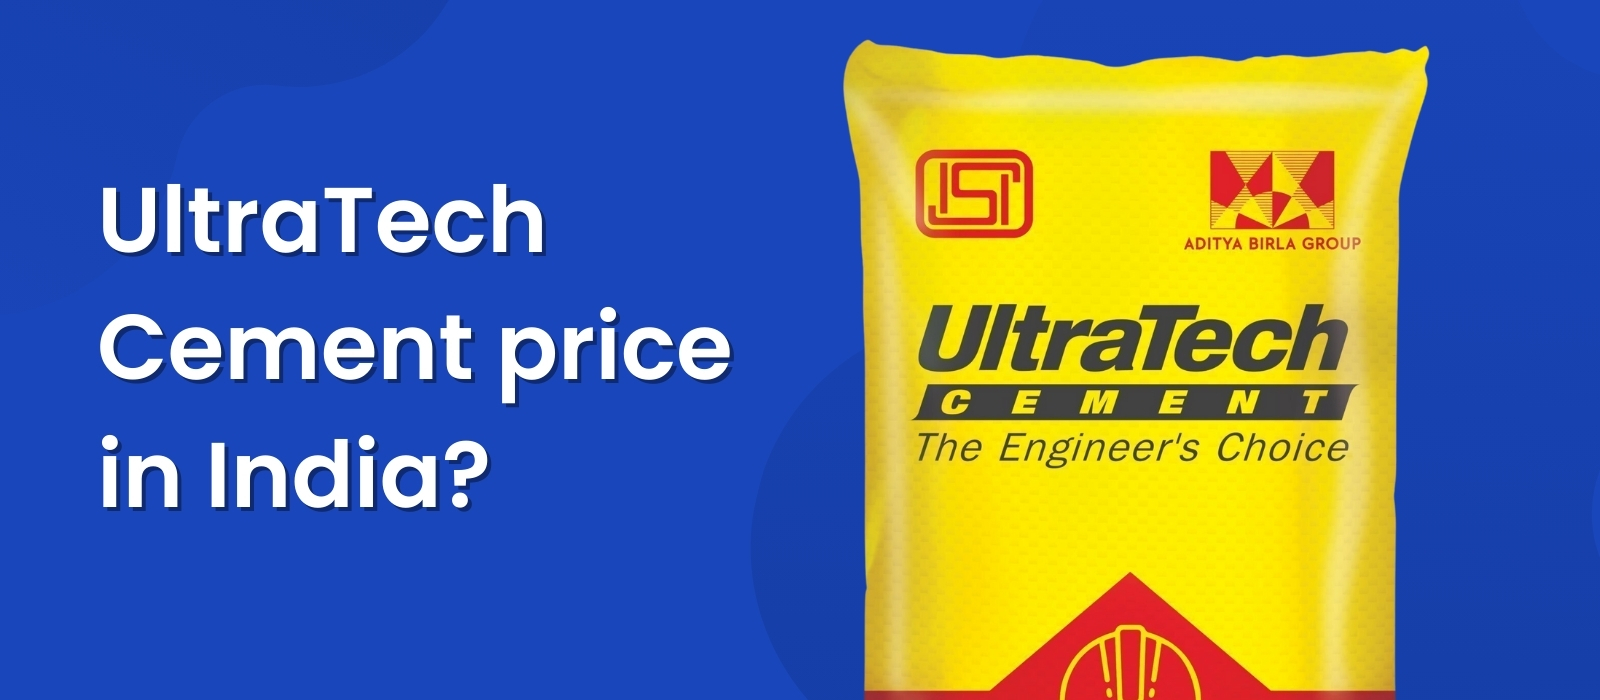 UltraTech cement price in India